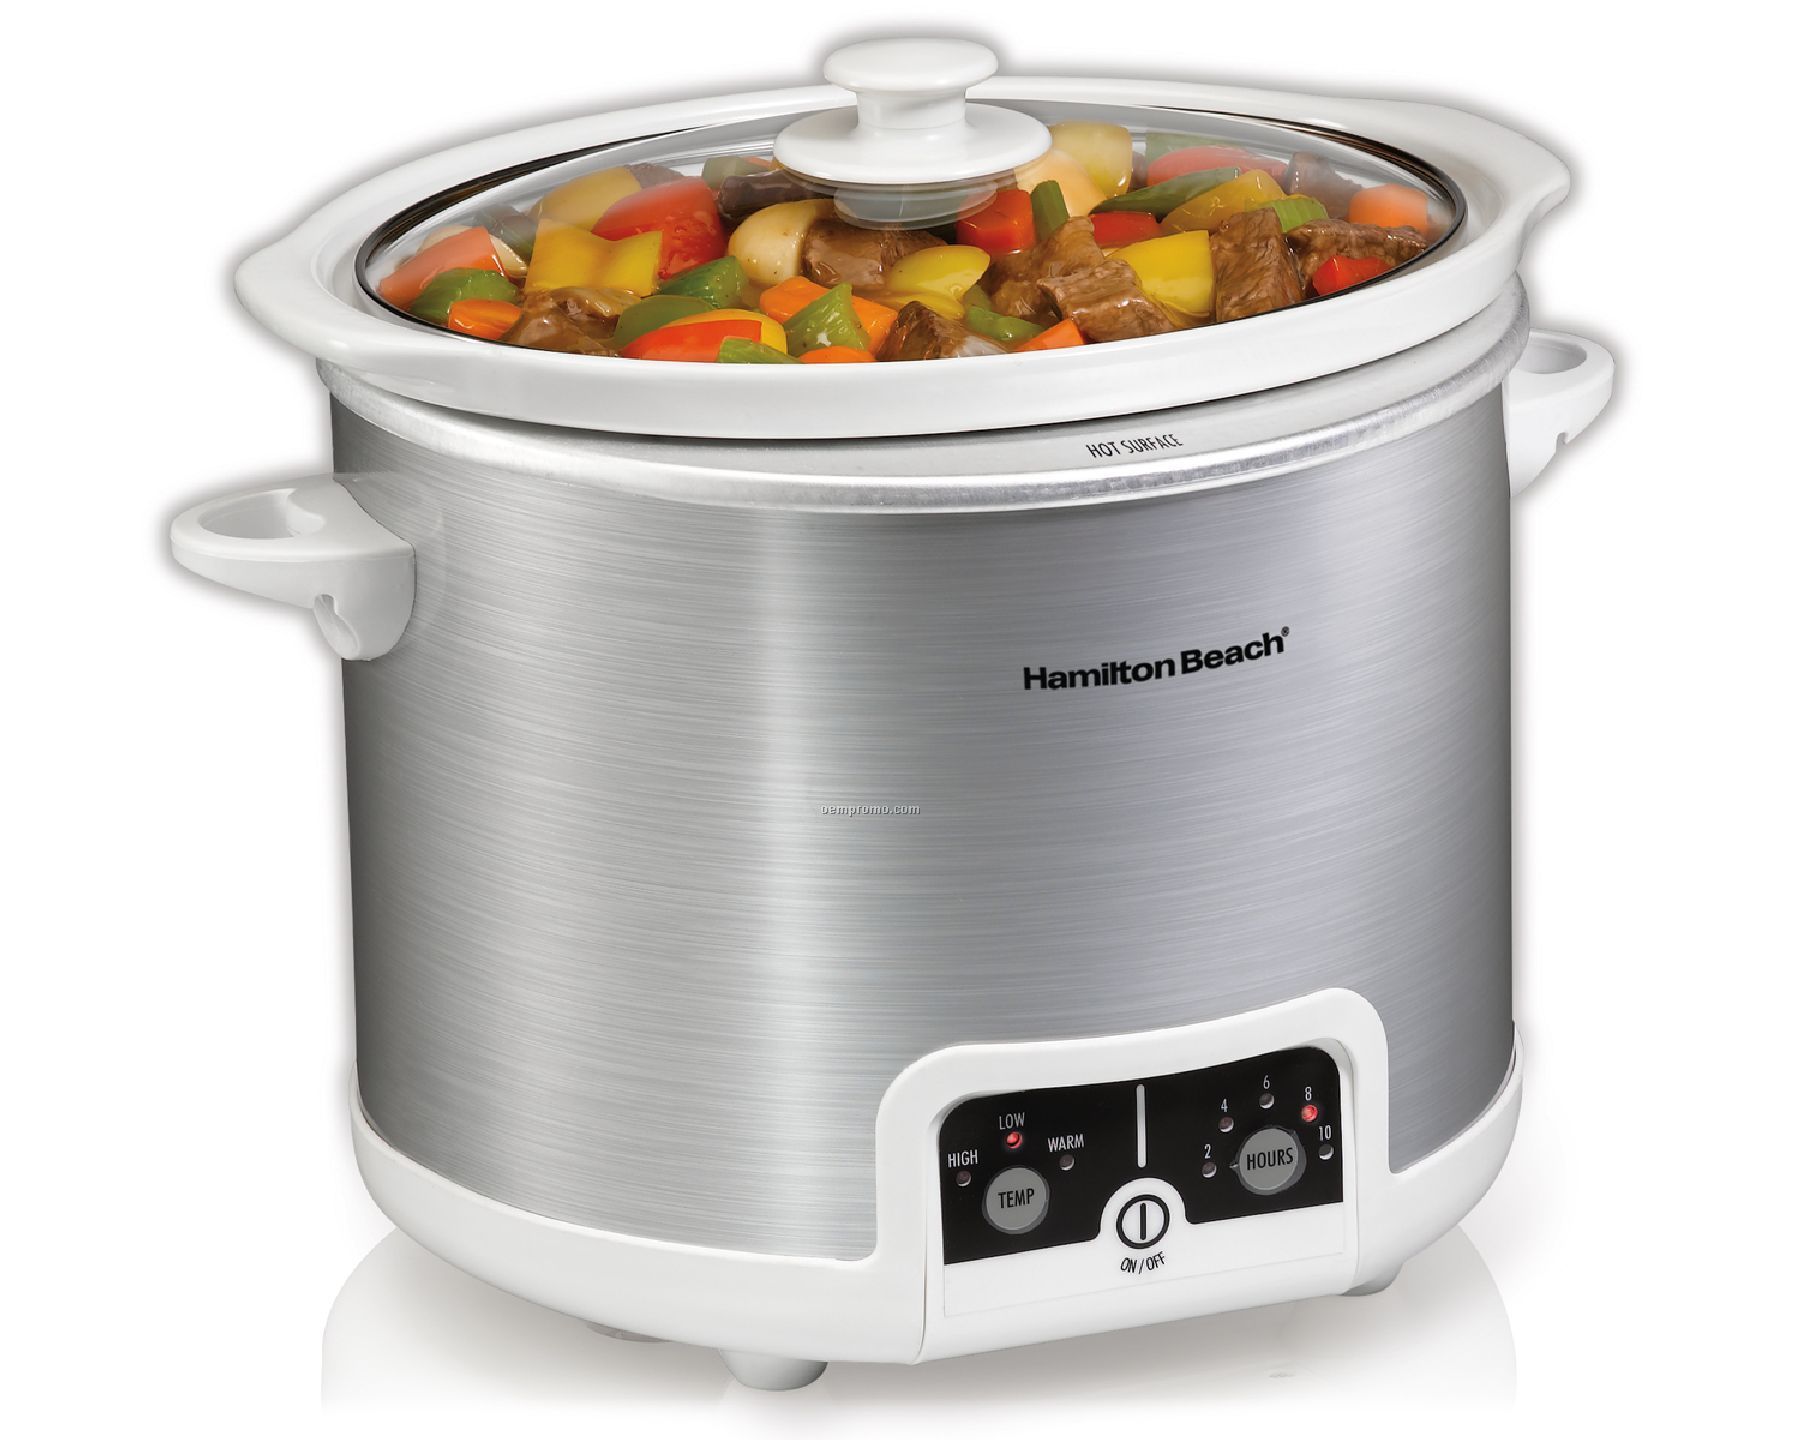 Hamilton Beach - Slow Cookers - 5.5 Qt Oval With Programmable